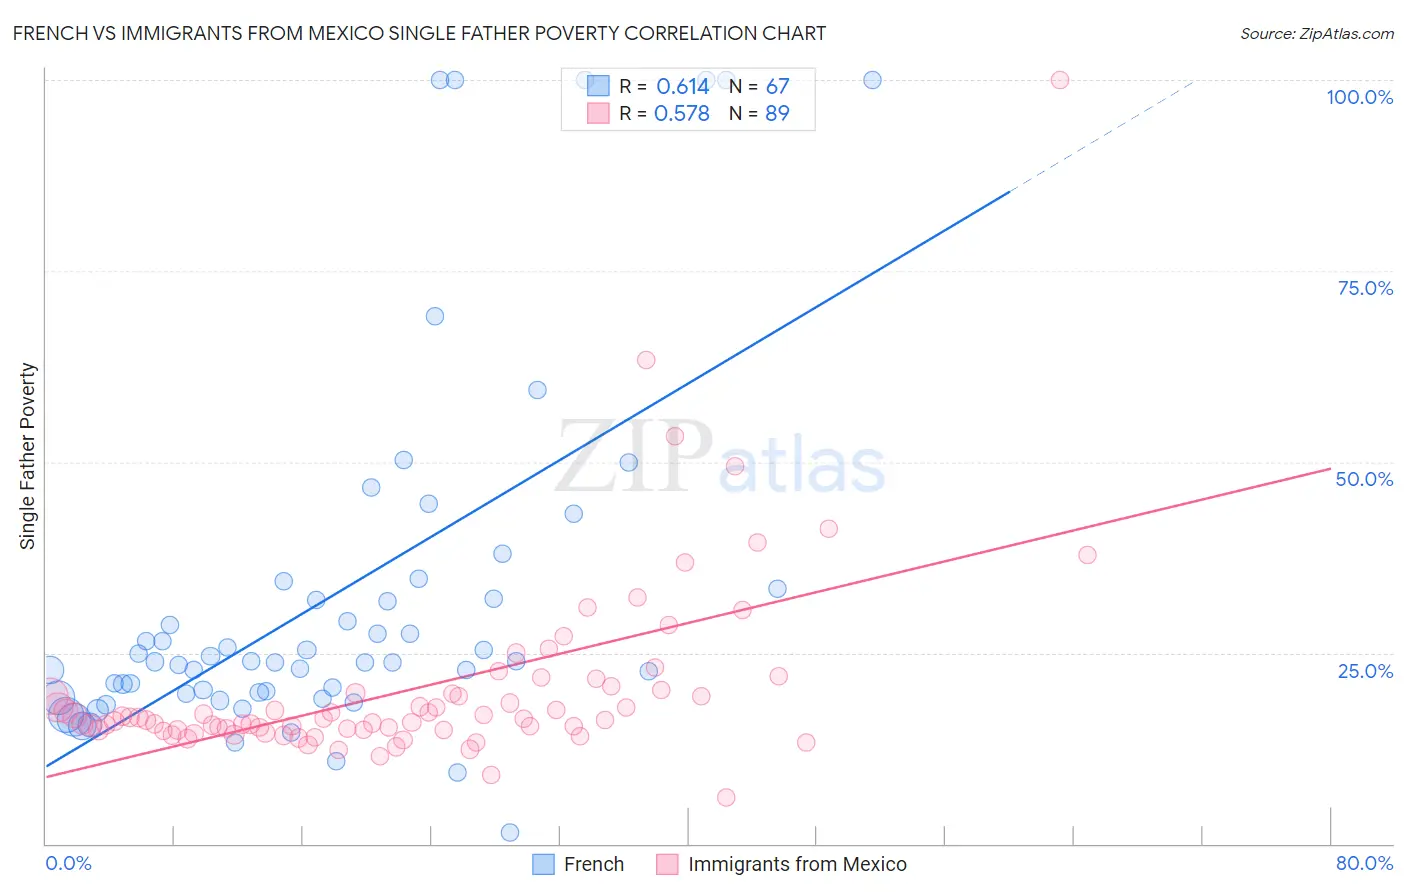 French vs Immigrants from Mexico Single Father Poverty